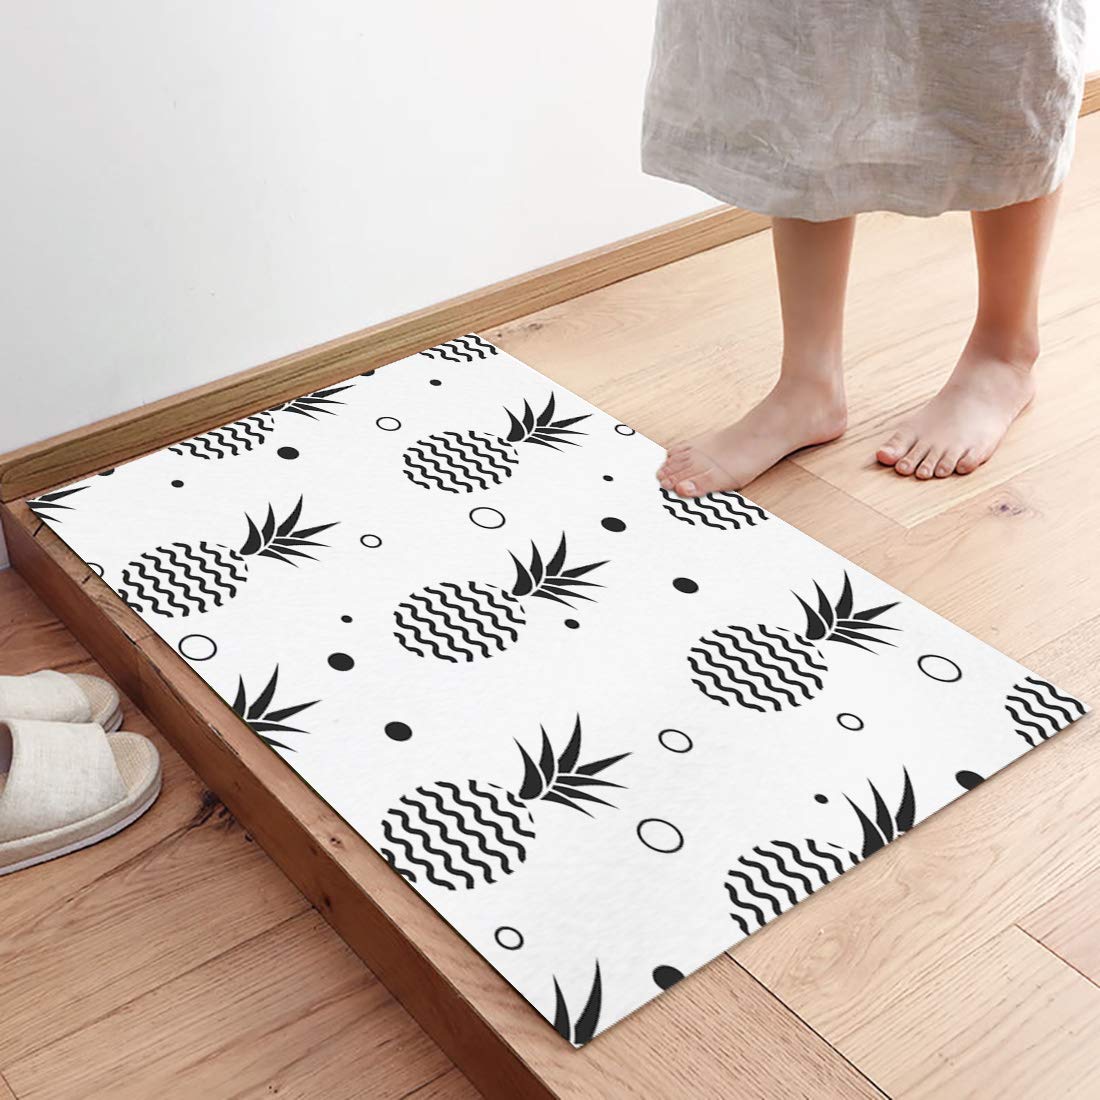 Door Mat for Bedroom Decor, Simple Pineapple Floor Mats, Holiday Rugs for Living Room, Absorbent Non-Slip Bathroom Rugs Home Decor Kitchen Mat Area Rug 18x30 Inch